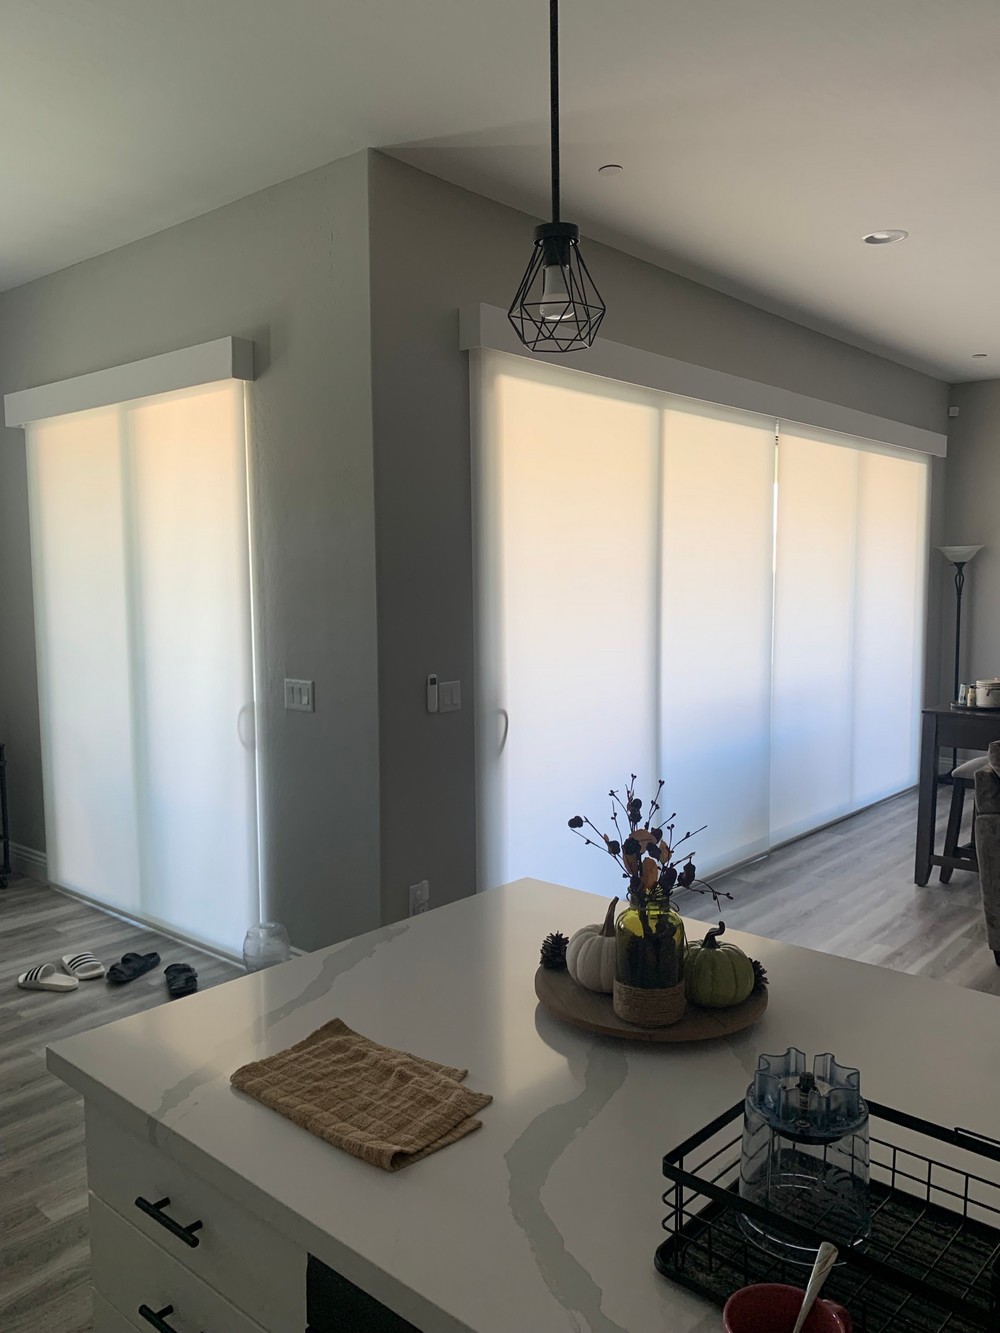 Captivating Automated Roller Shades Over Large Sliding Doors on Bonnie Piper St in Northwest Las Vegas, NV